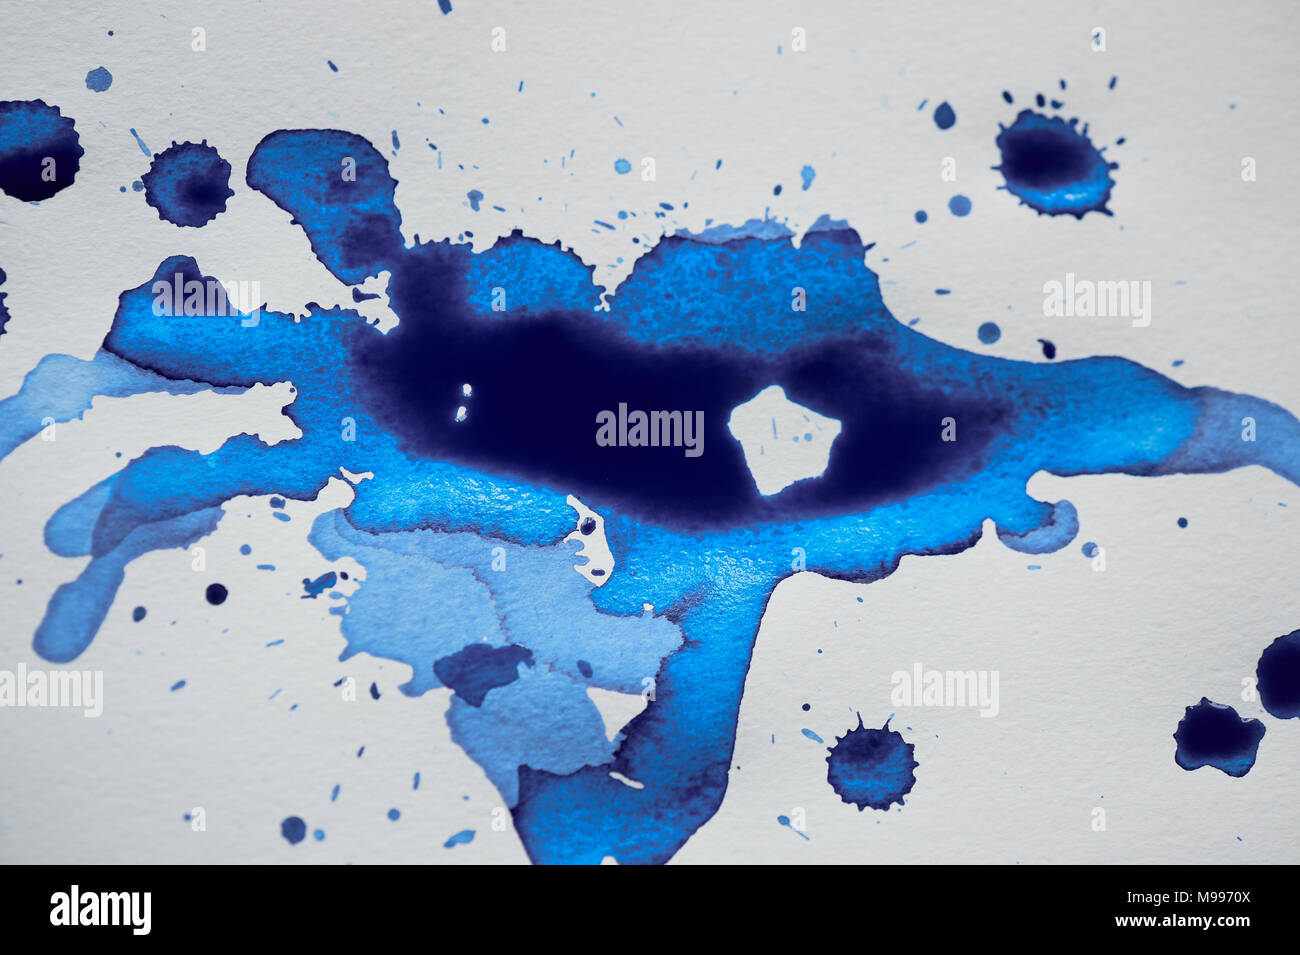 Blue ink blot art,the attributes for the artist. Stock Photo